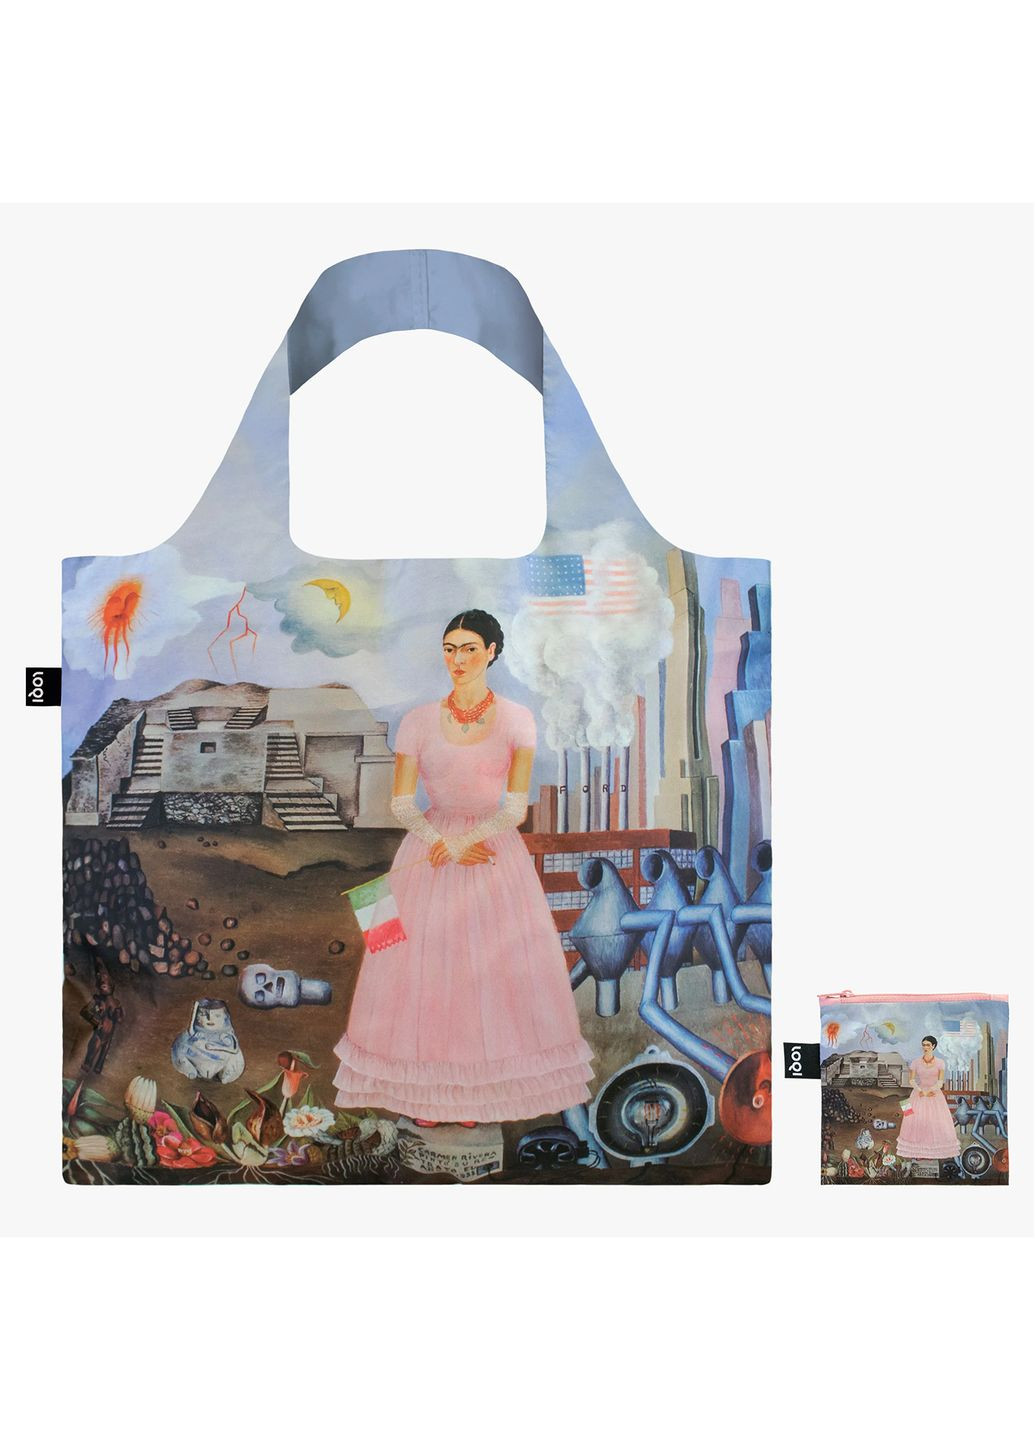 Сумка шоппер FRIDA KAHLO Self Portrait on the Borderline between Mexico and the United States Recycled Bag Loqi (276461469)